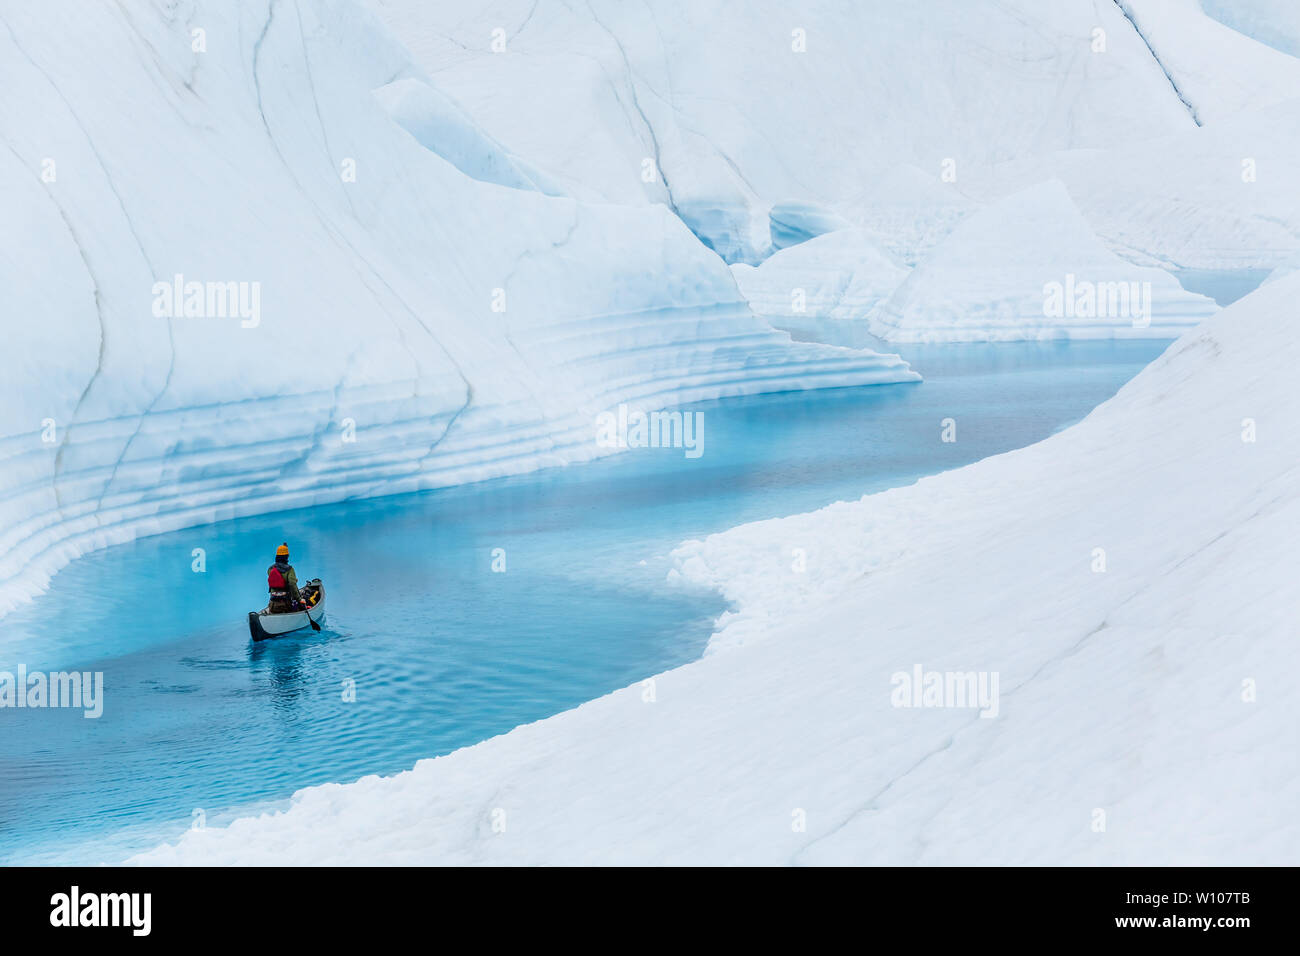 A man paddles solo on an inflatable canoe down a still water river on the Matanuska Glacier in the Alaskan wilderness. Stock Photo